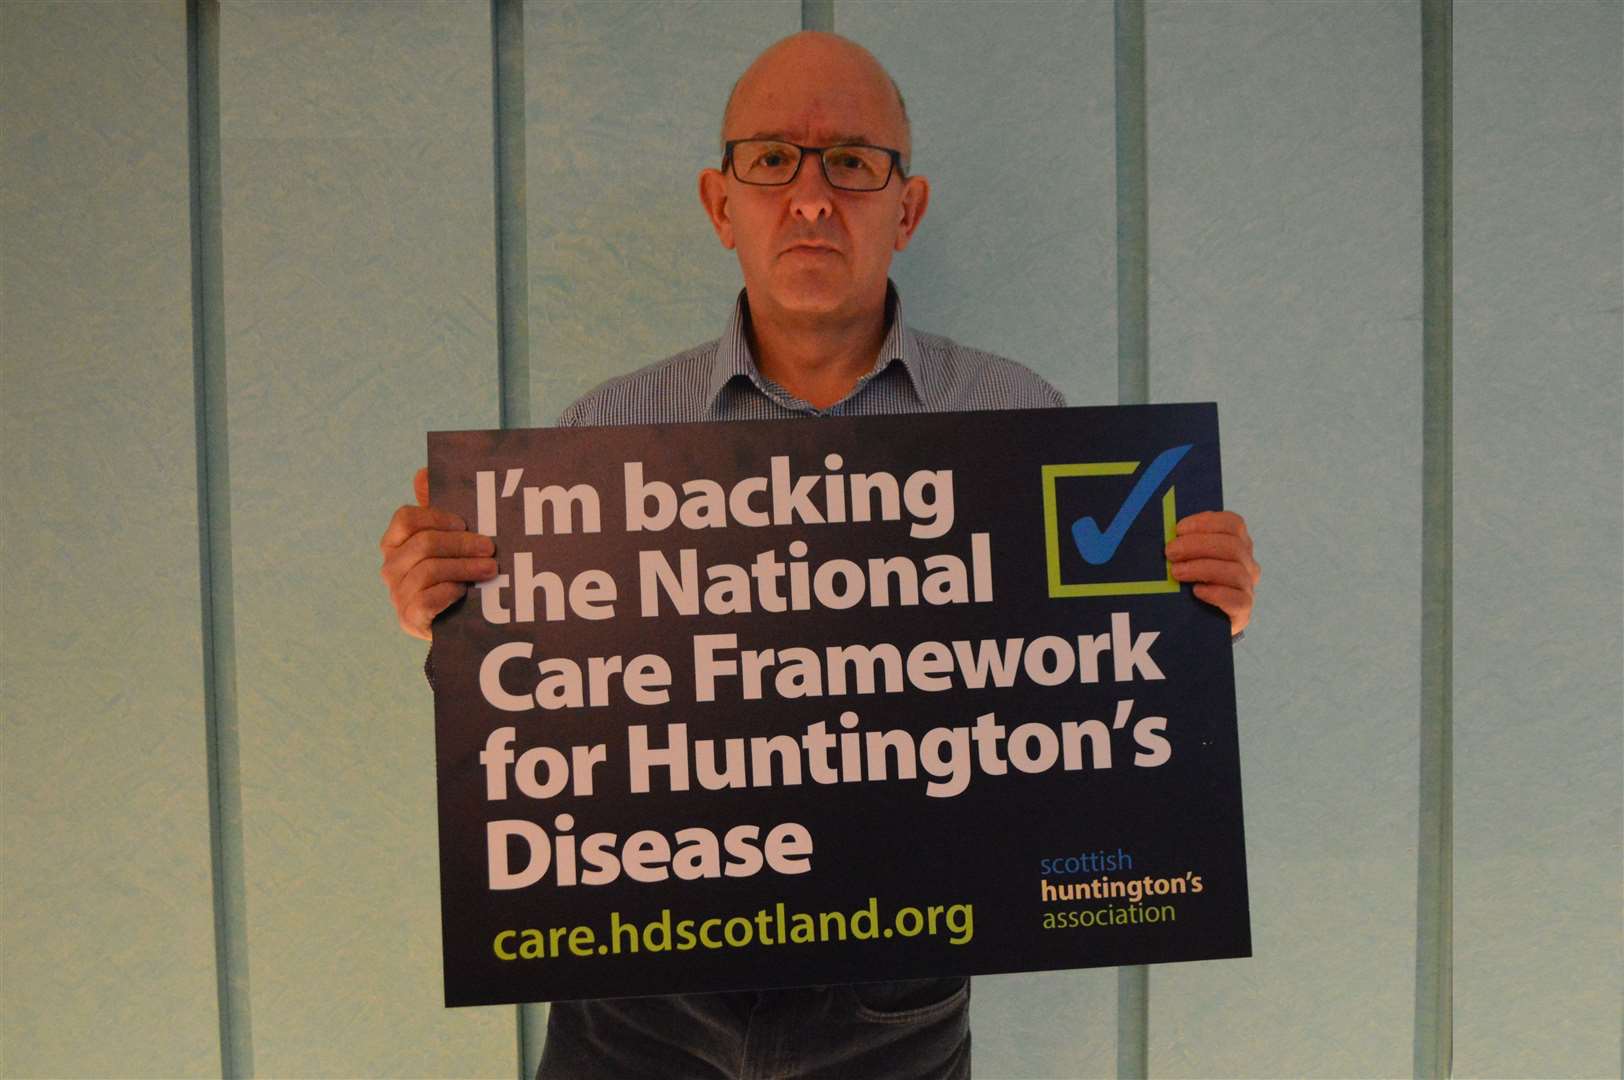 Edwin Sinclair is giving his backing to a new framework designed to support Huntington's disease sufferers and their families.